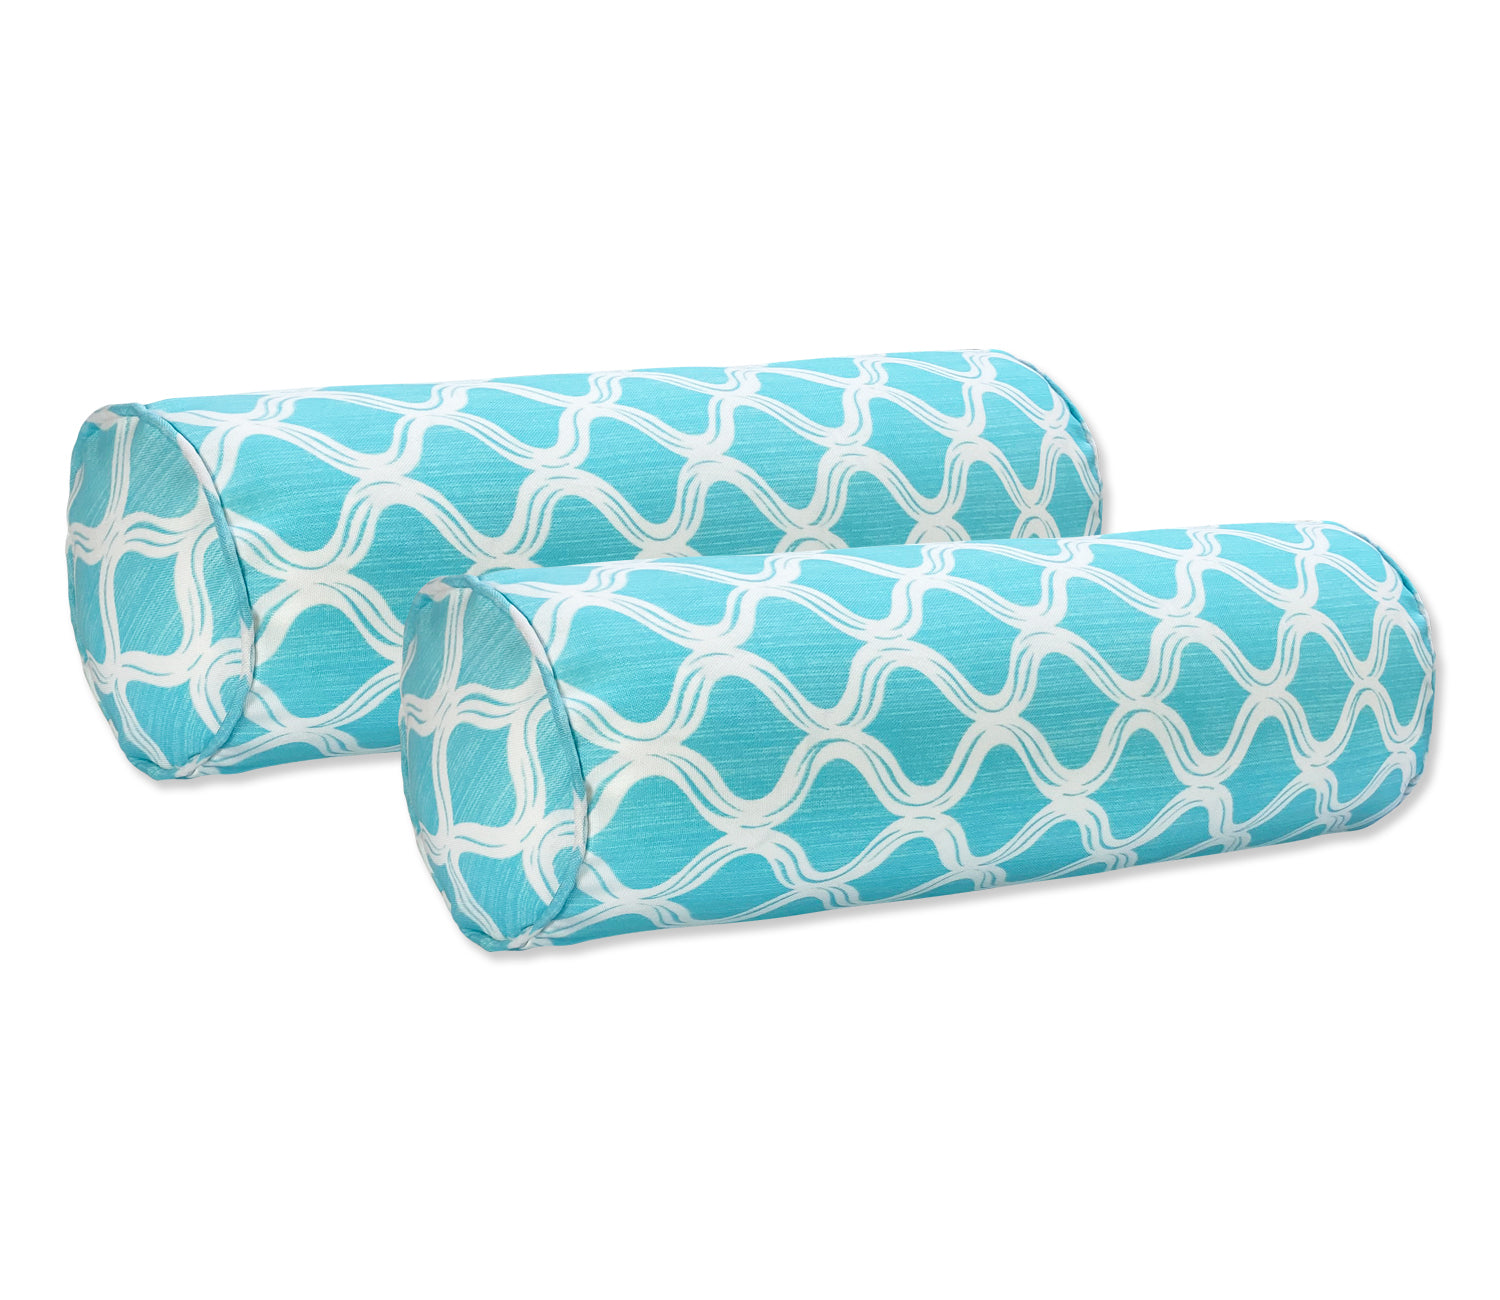 Outdoor Bolster Pillows Set of 2 Blue Geometry Round 20x6 Inch Patio Neck Roll Pillows